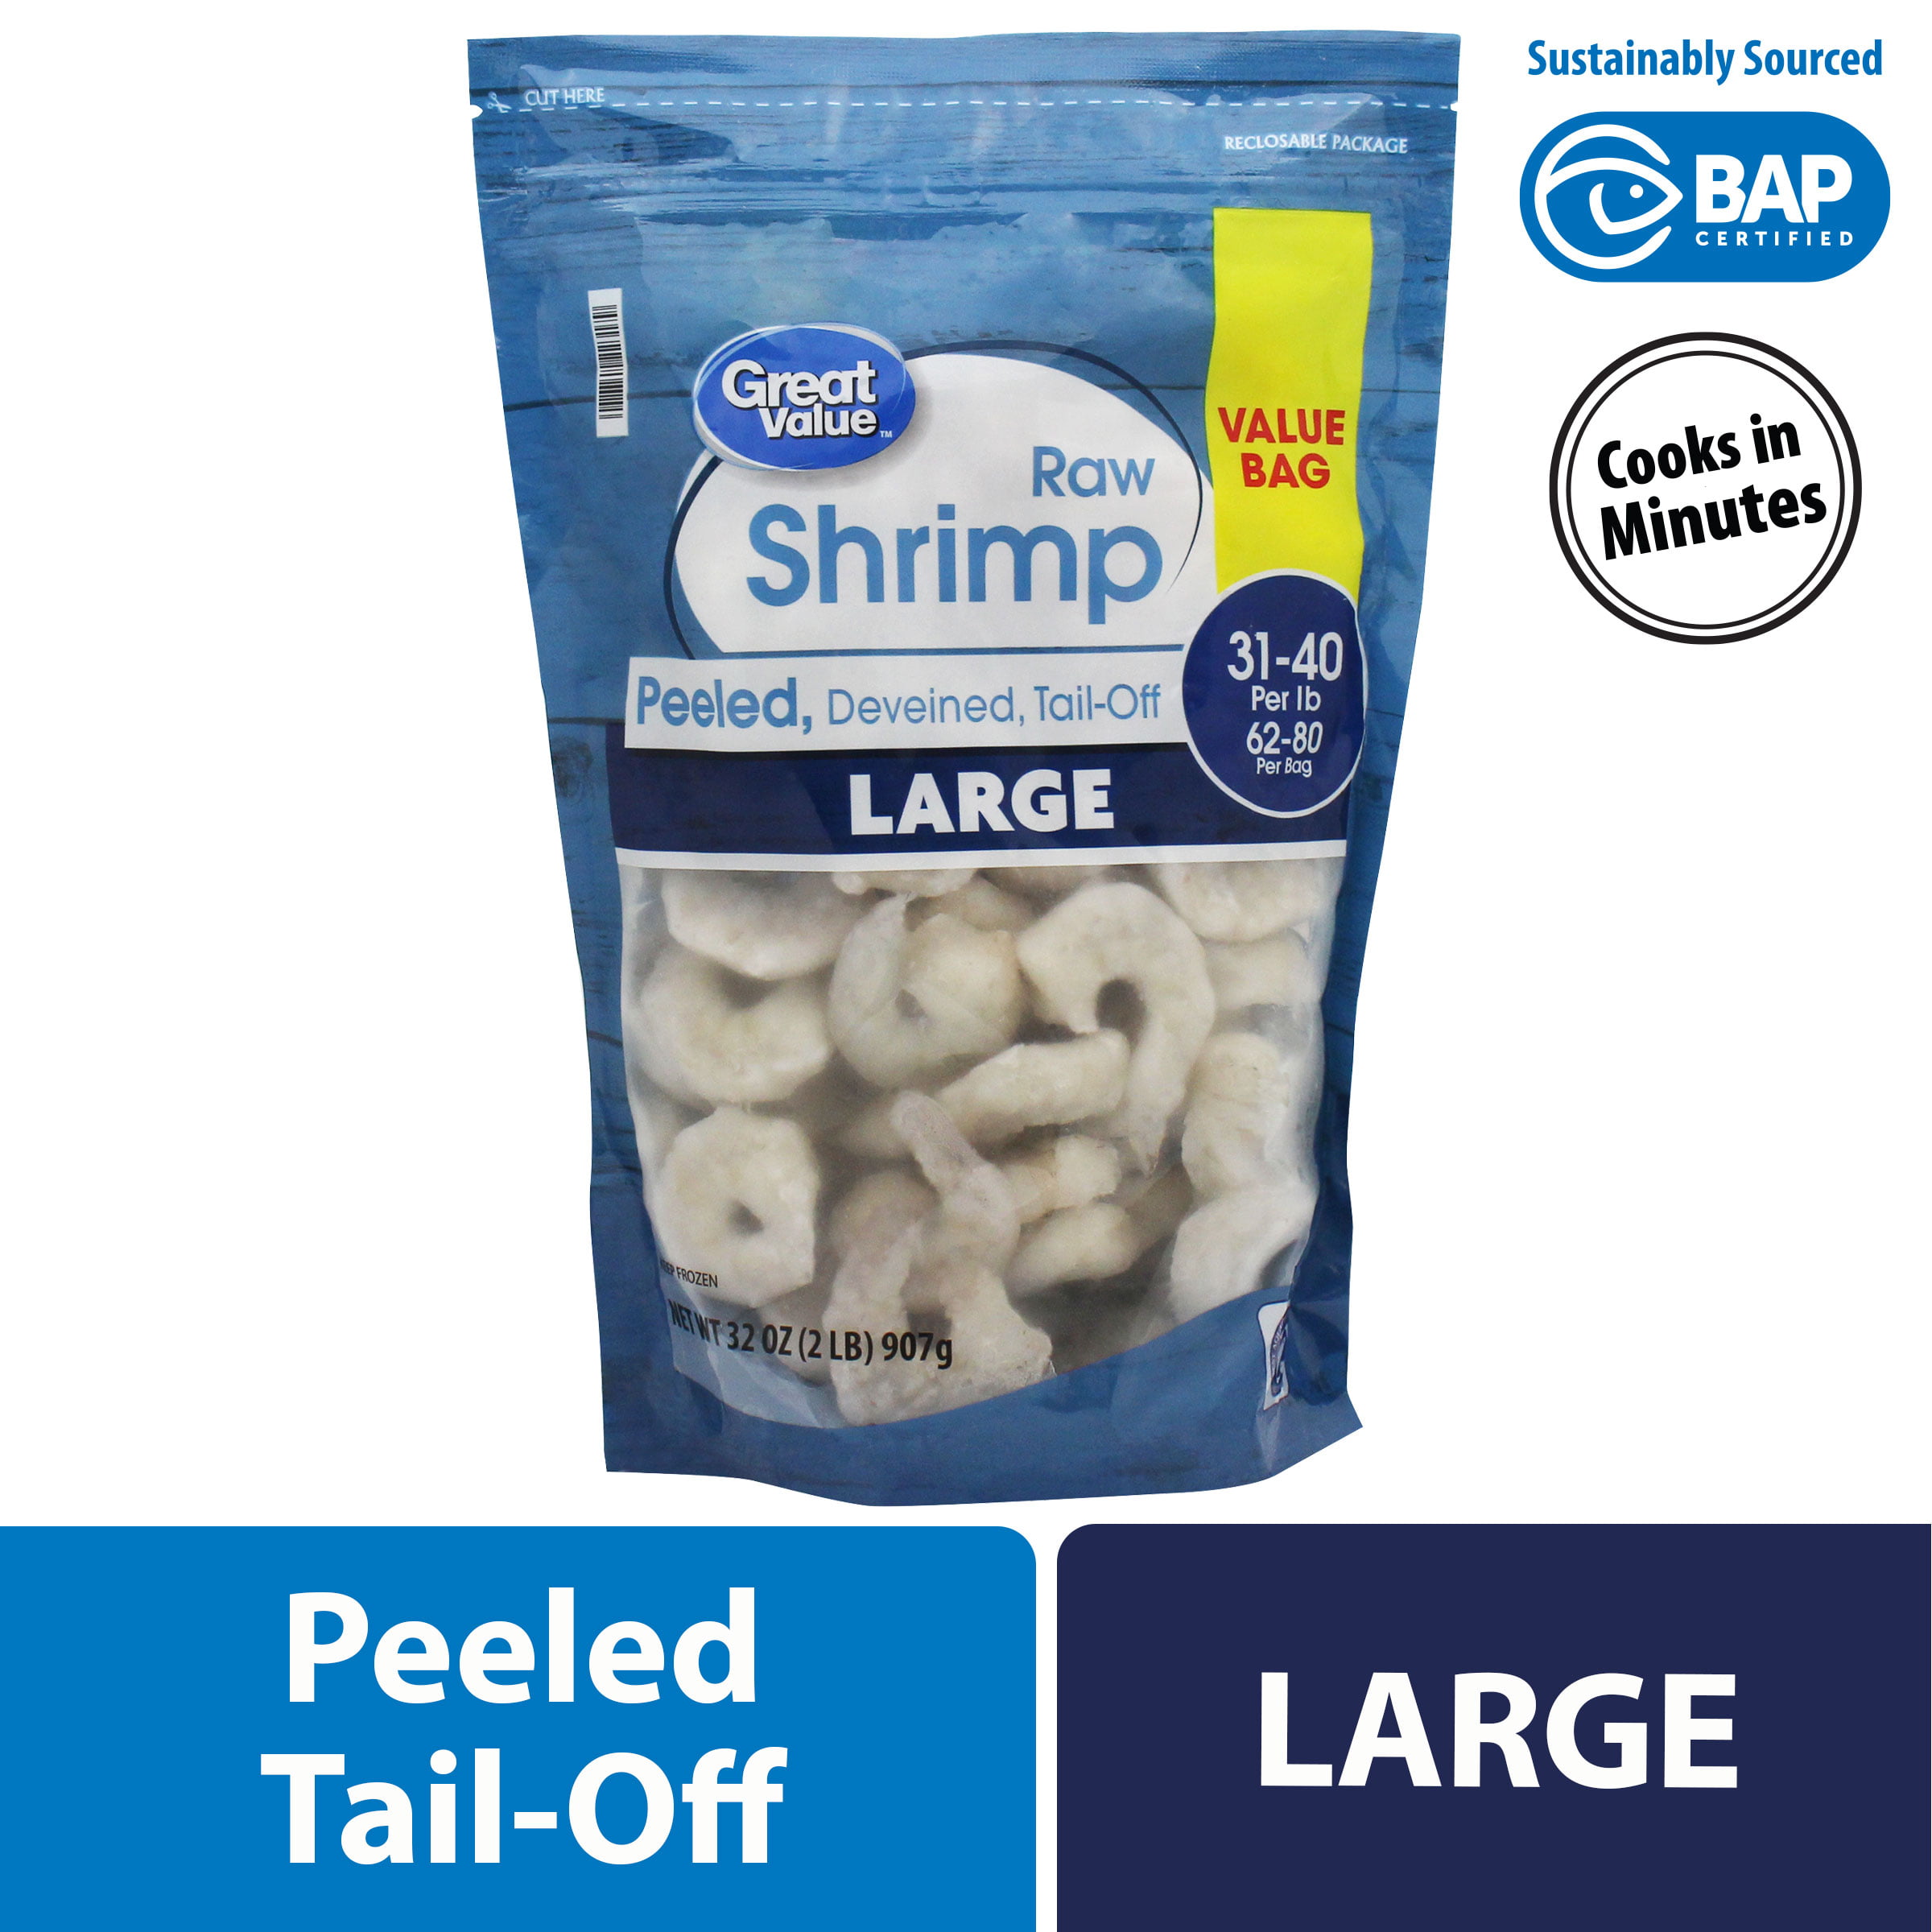 Great Value Frozen Raw Large Peeled & Deveined, Tail-Off Shrimp, 2 lb (31-40 count per lb)